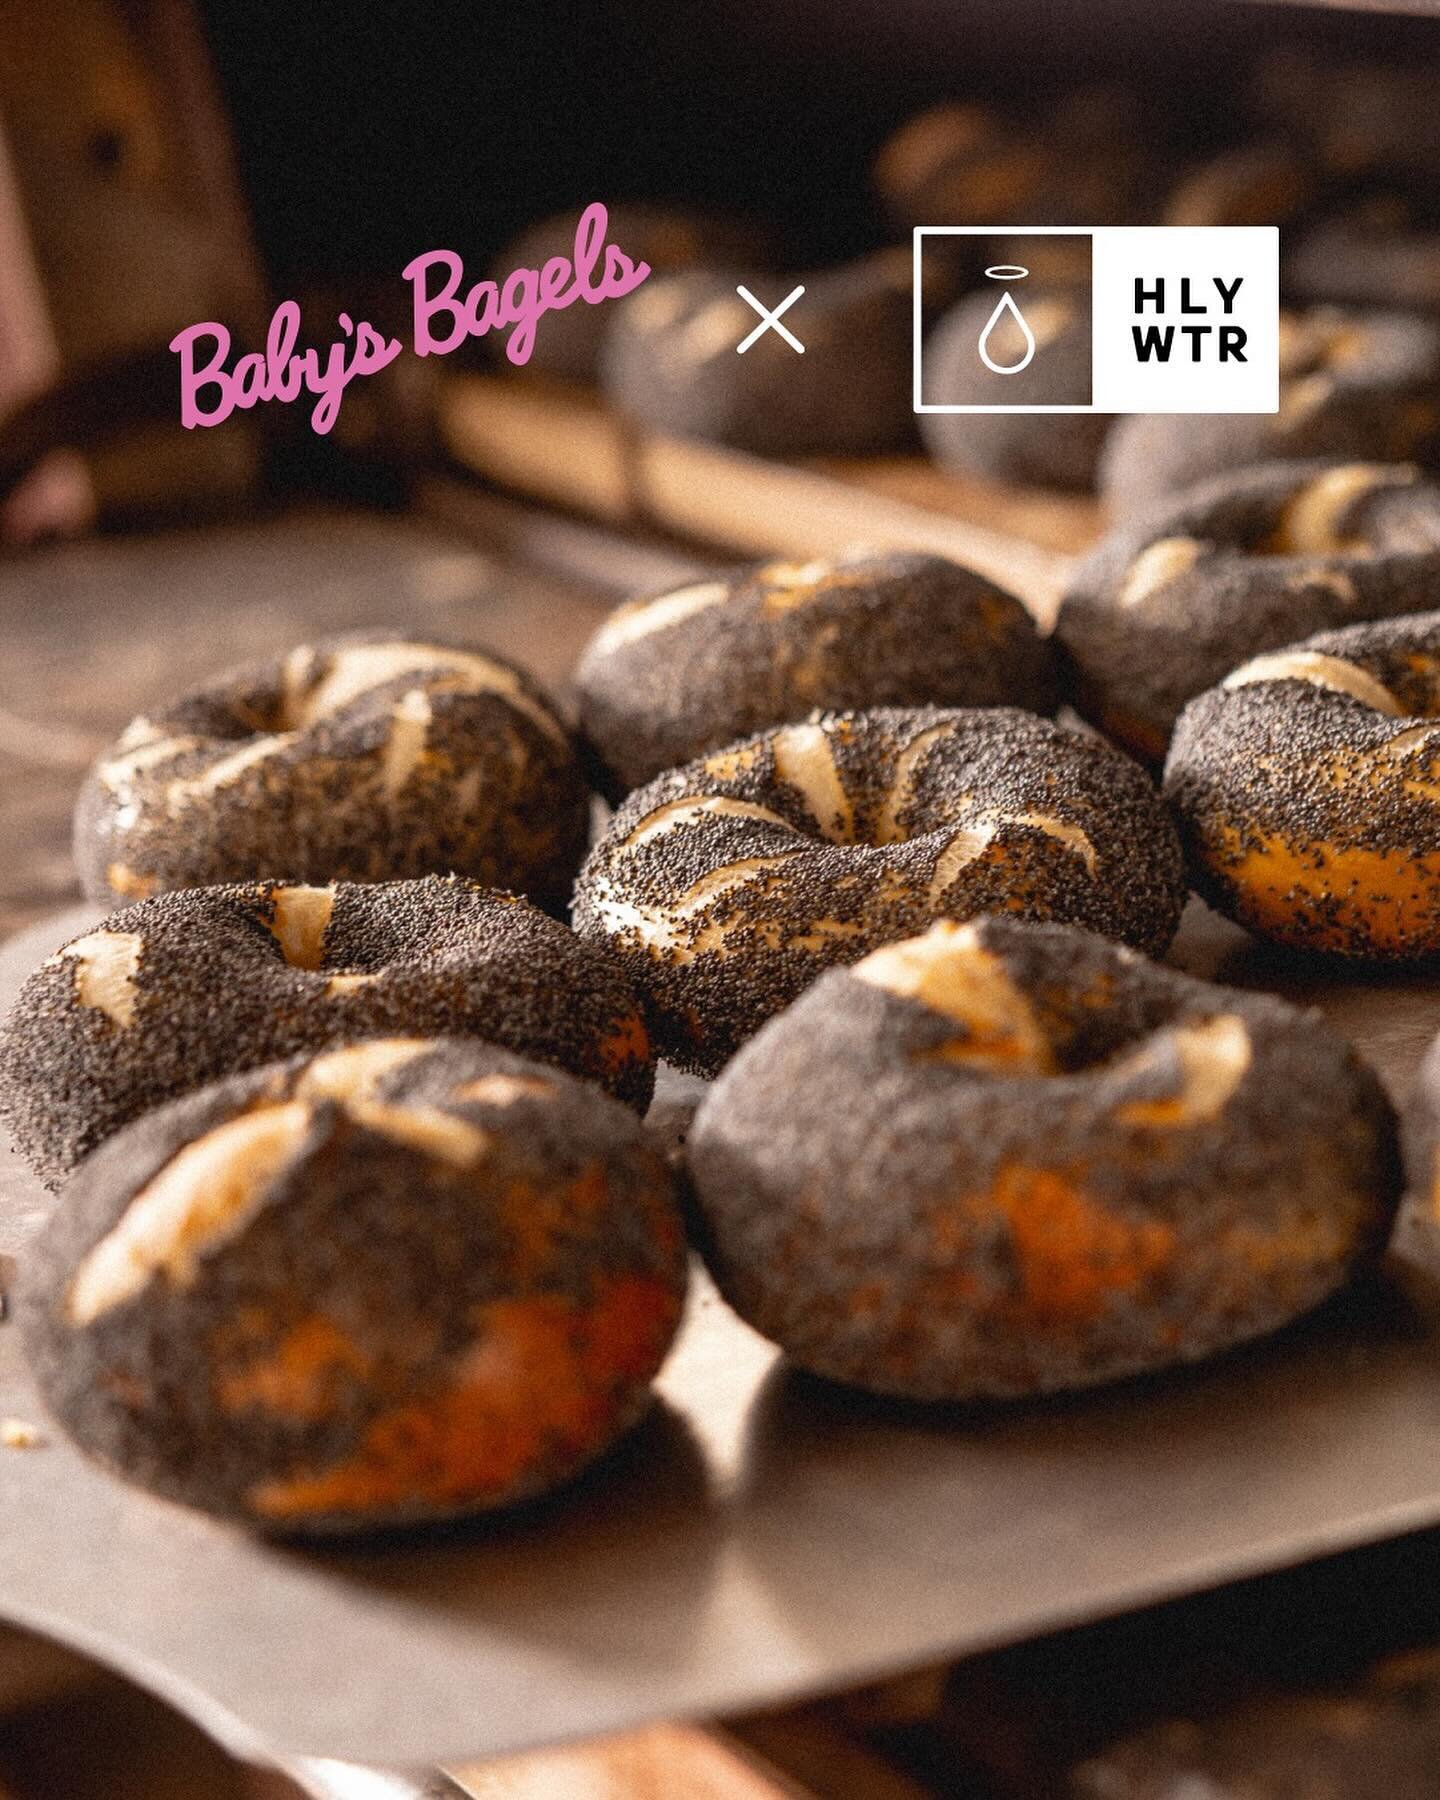 We are thrilled to announce we are now serving @babys.bagels on Saturdays! 

Don&rsquo;t walk, run because we guarantee they will sell out. 

Flavor options:  plain, poppy, sesame, salt, everything and their delicious cream cheese. 

See you tomorrow